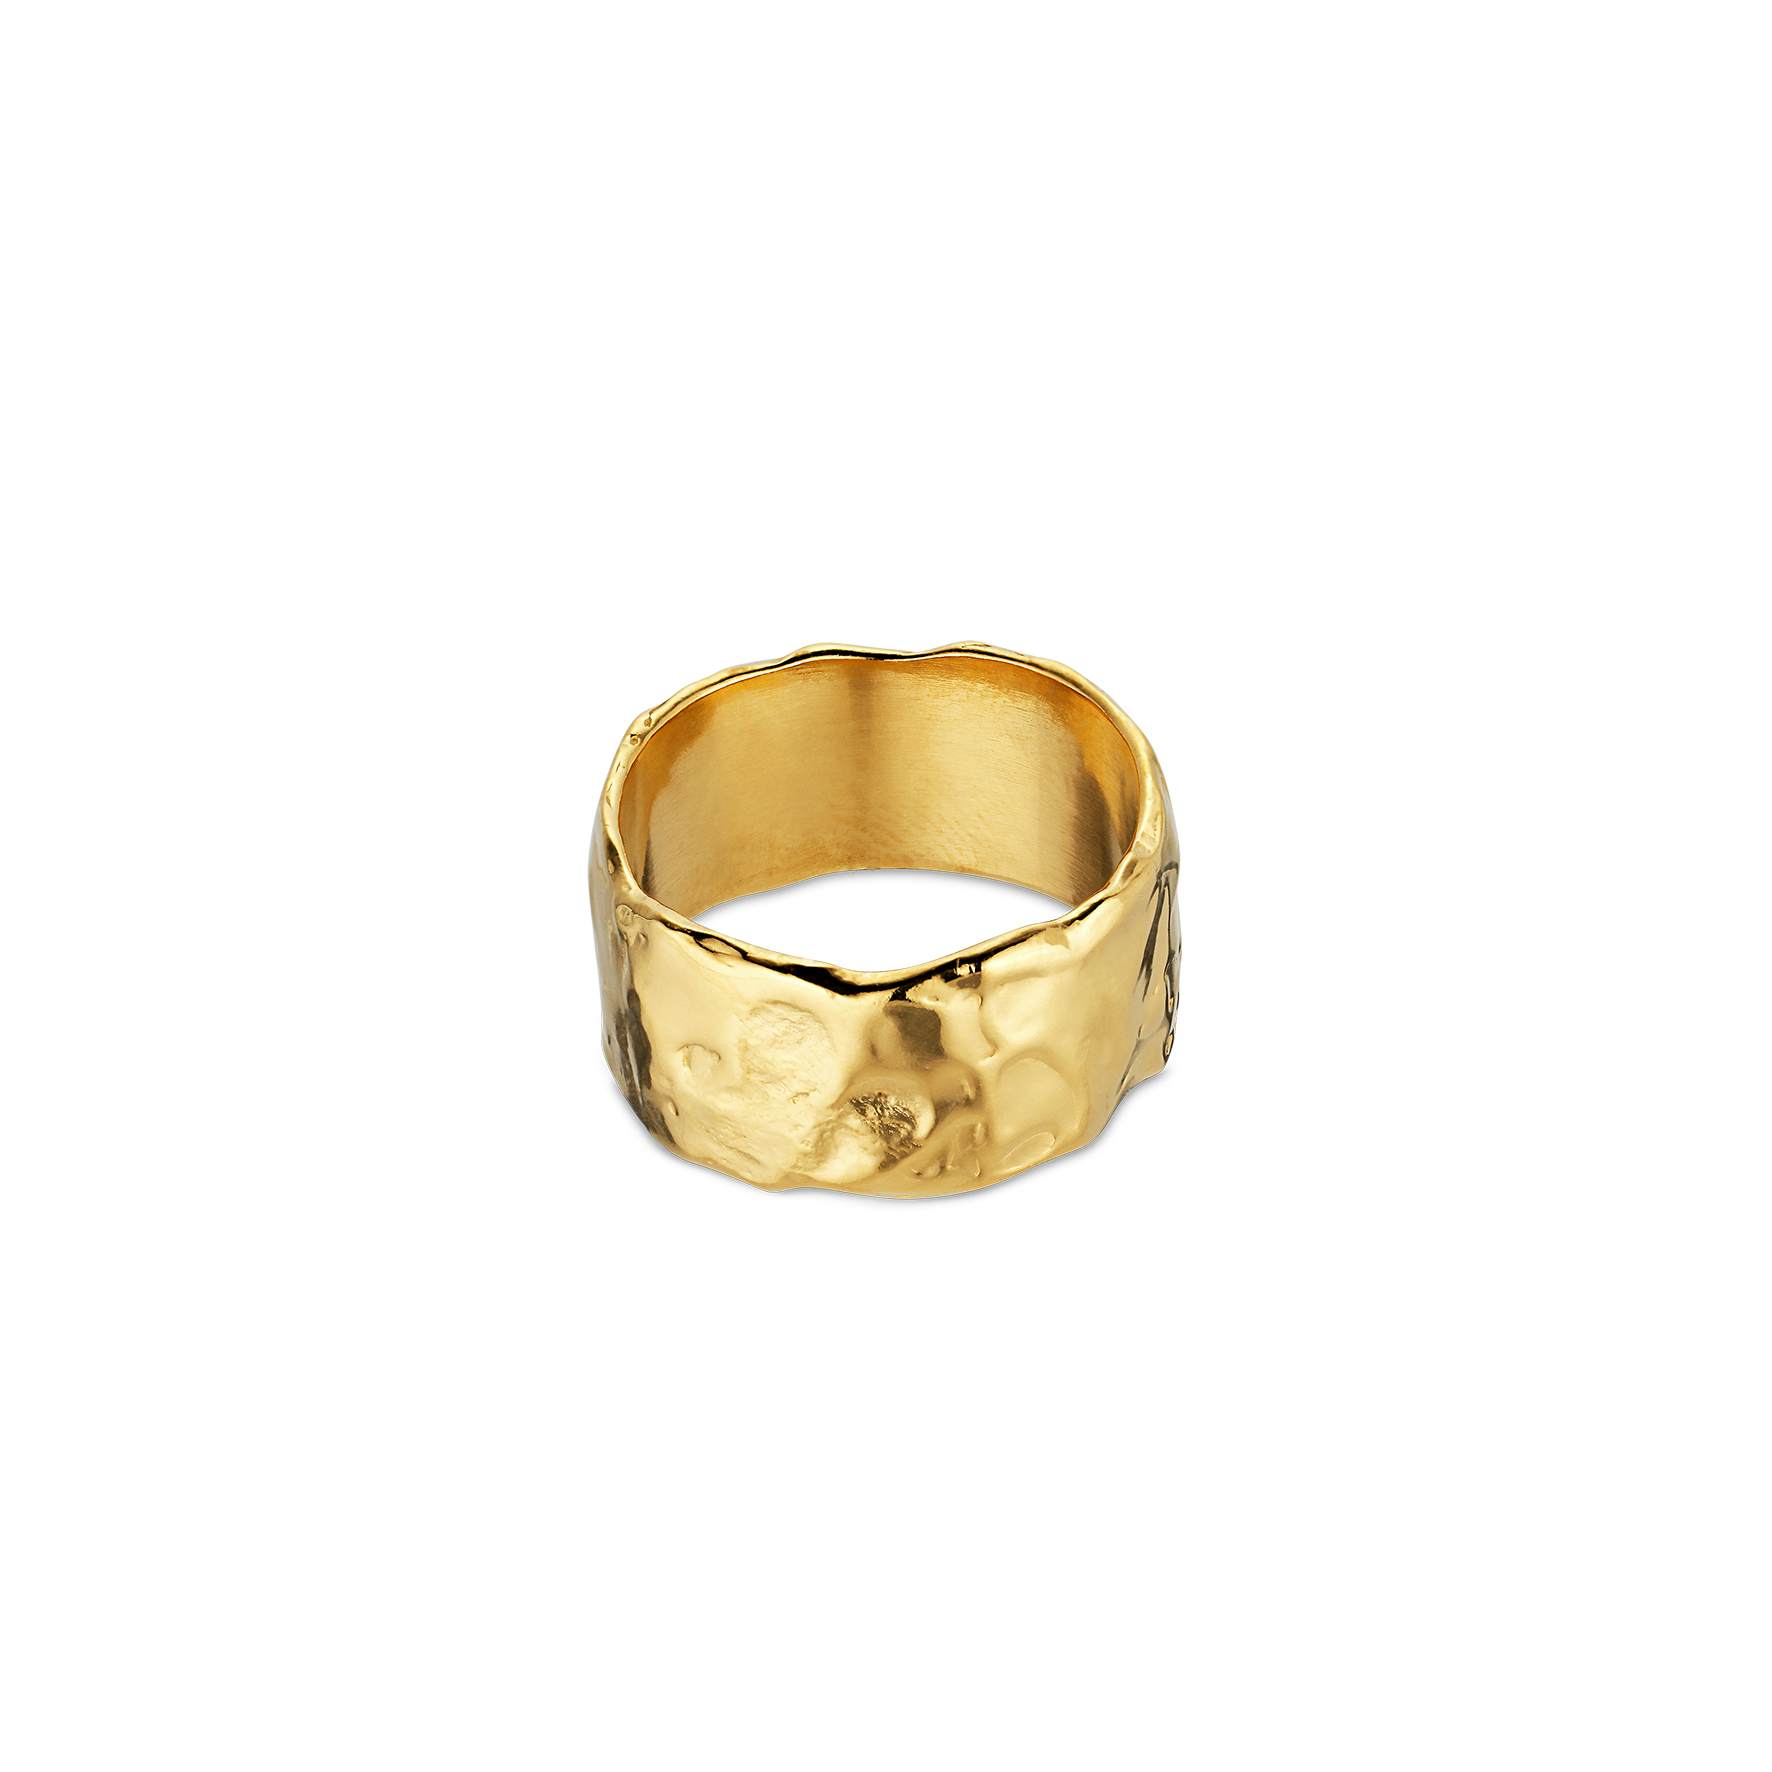 Bruised Heart Ring from Jane Kønig in Goldplated-Silver Sterling 925